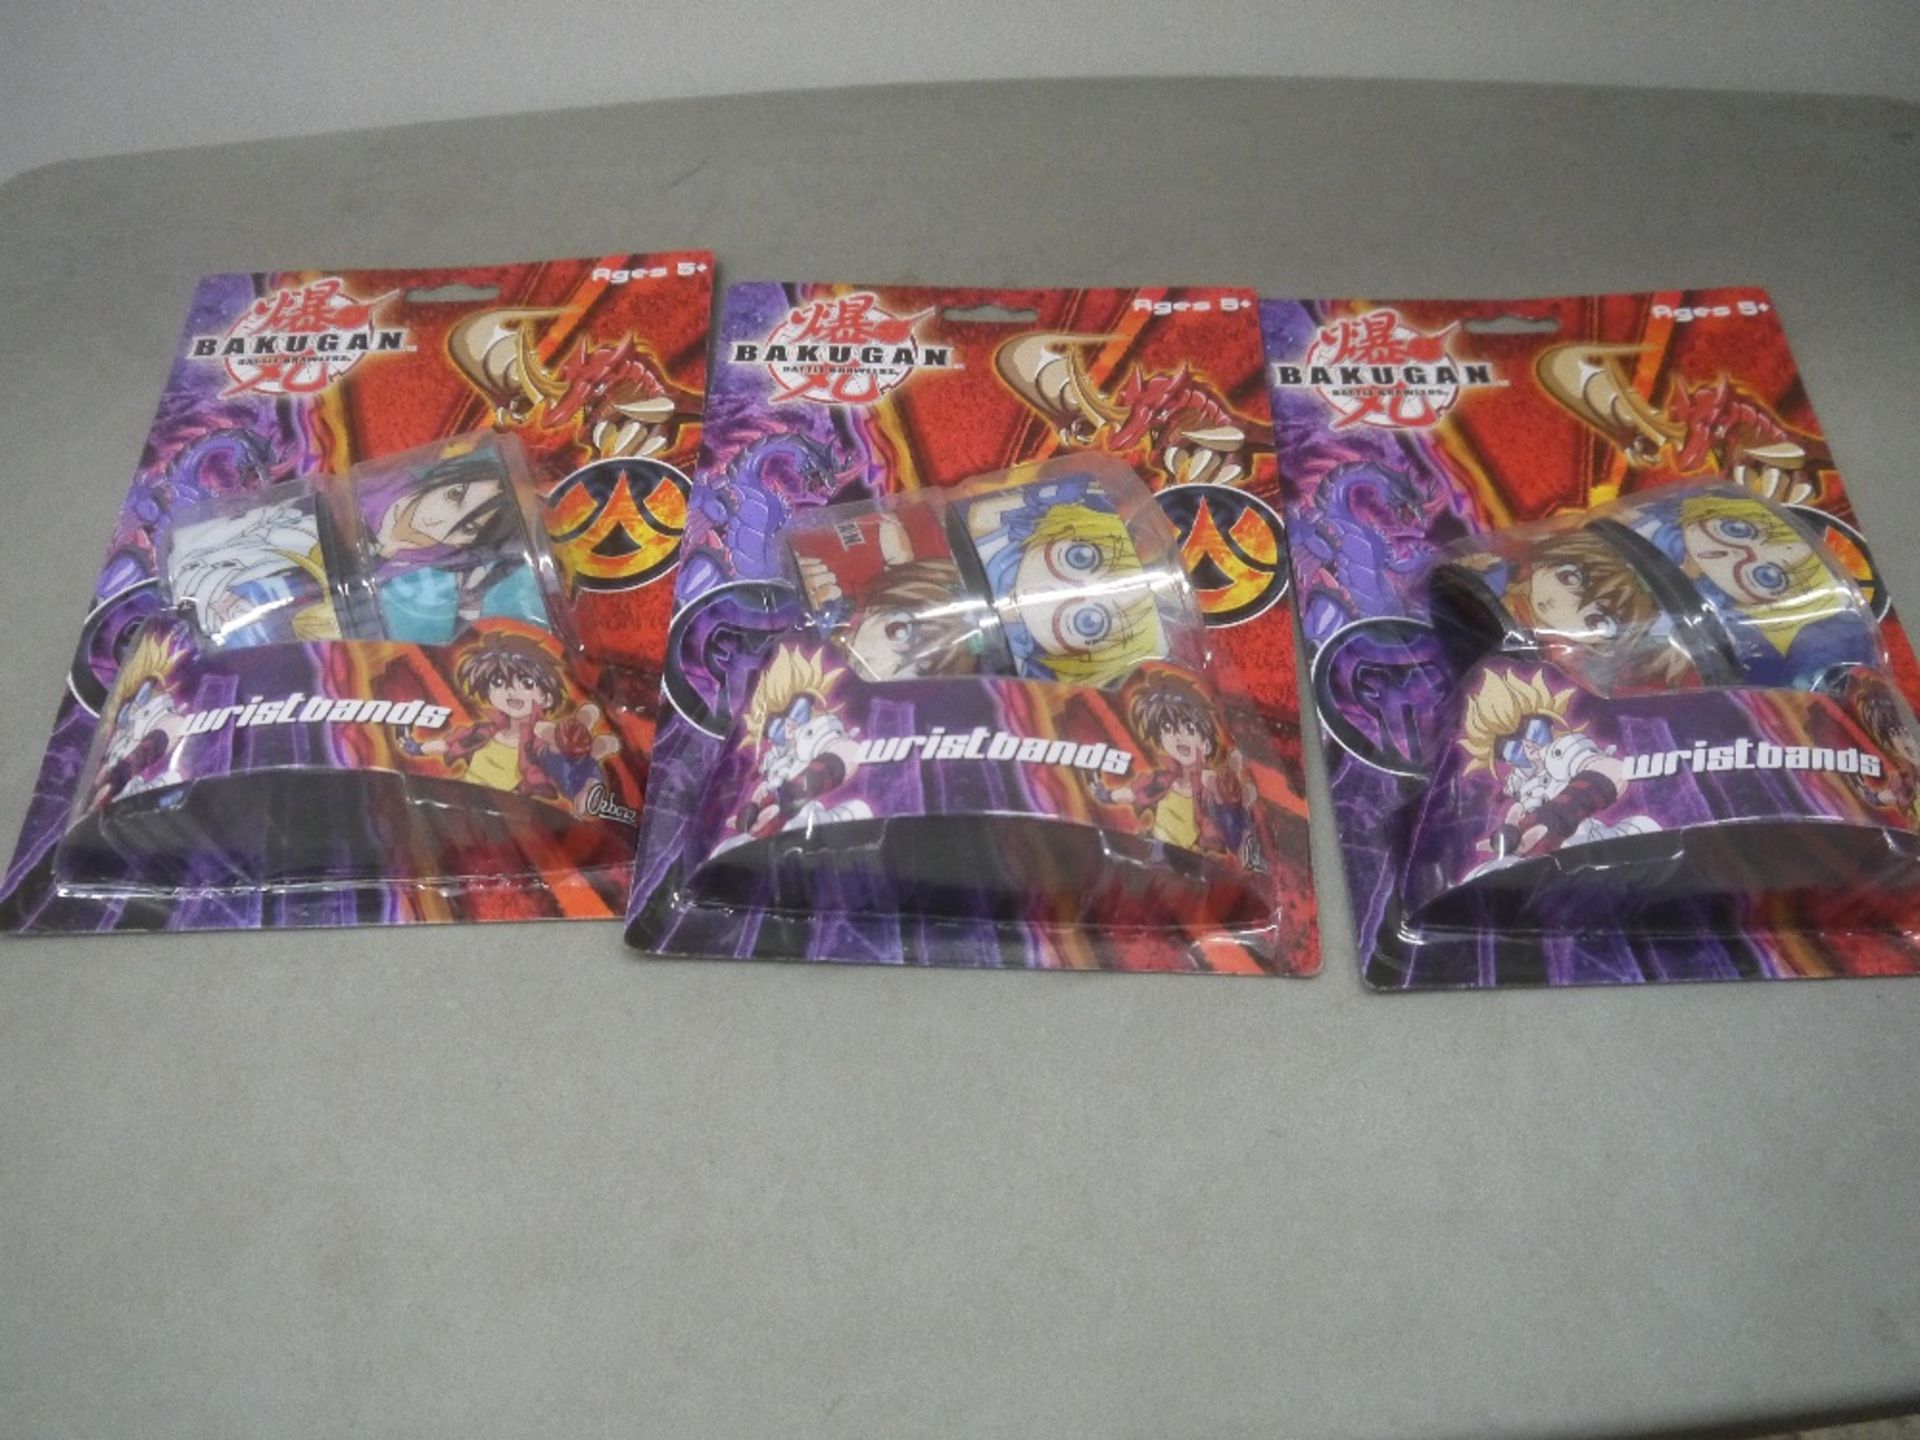 3x Bakugan Wristbands. Both New In Packaging.